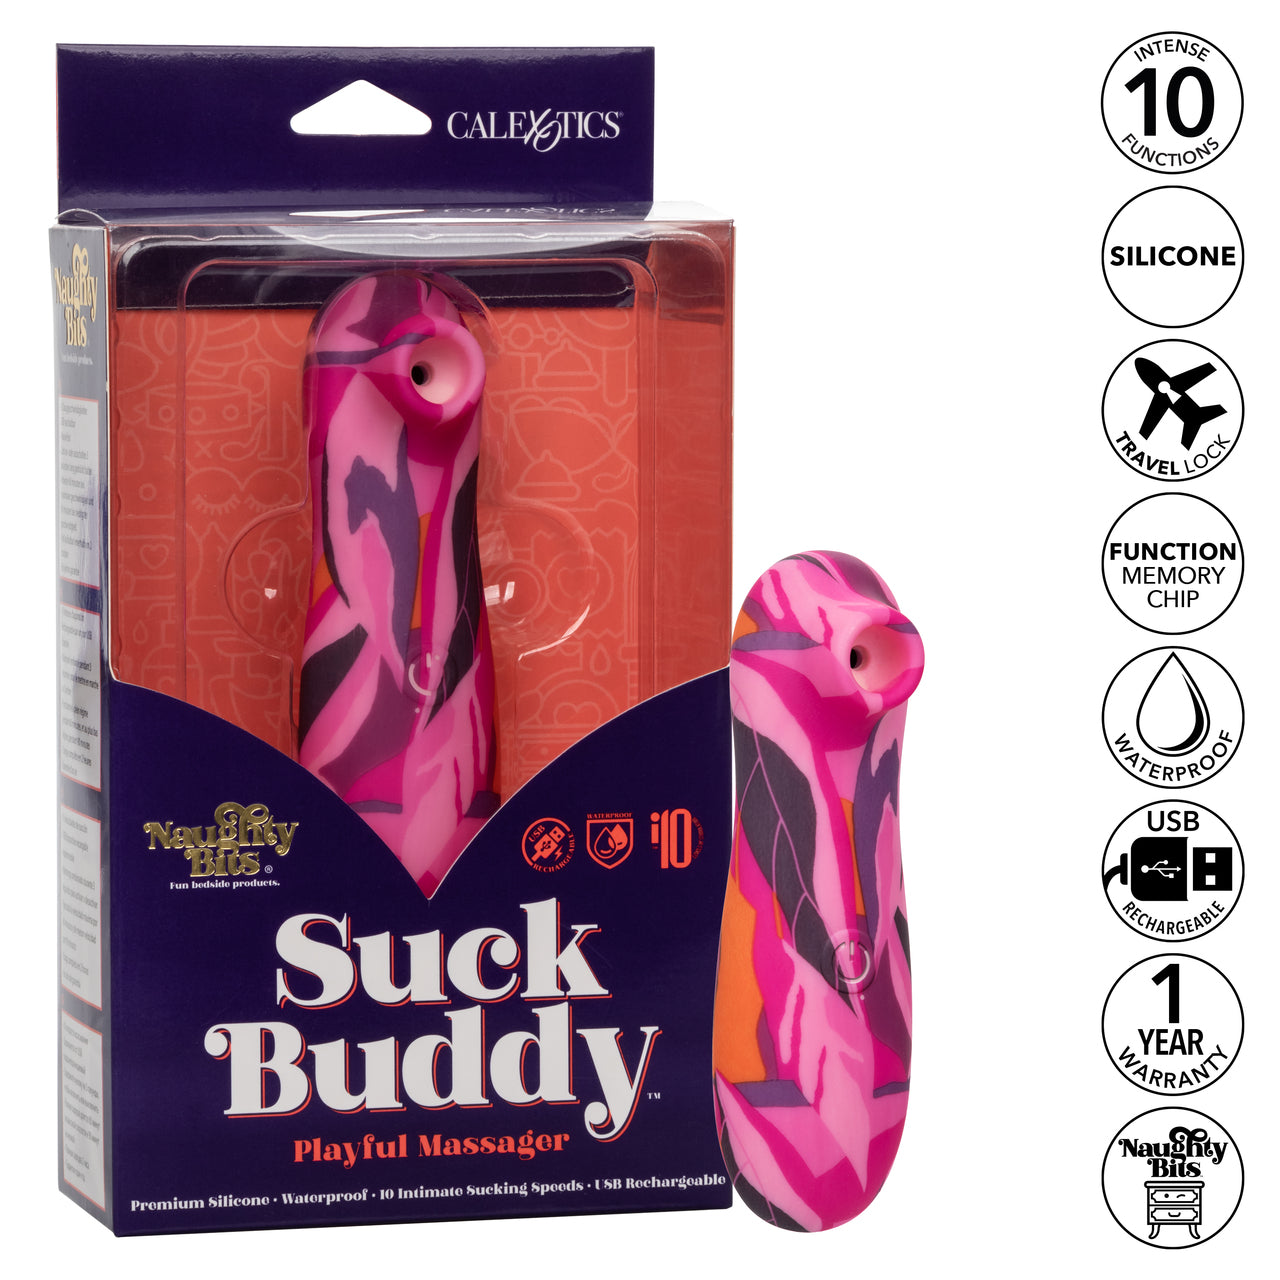 Naughty Bits Suck Buddy Playful Massager - Thorn & Feather